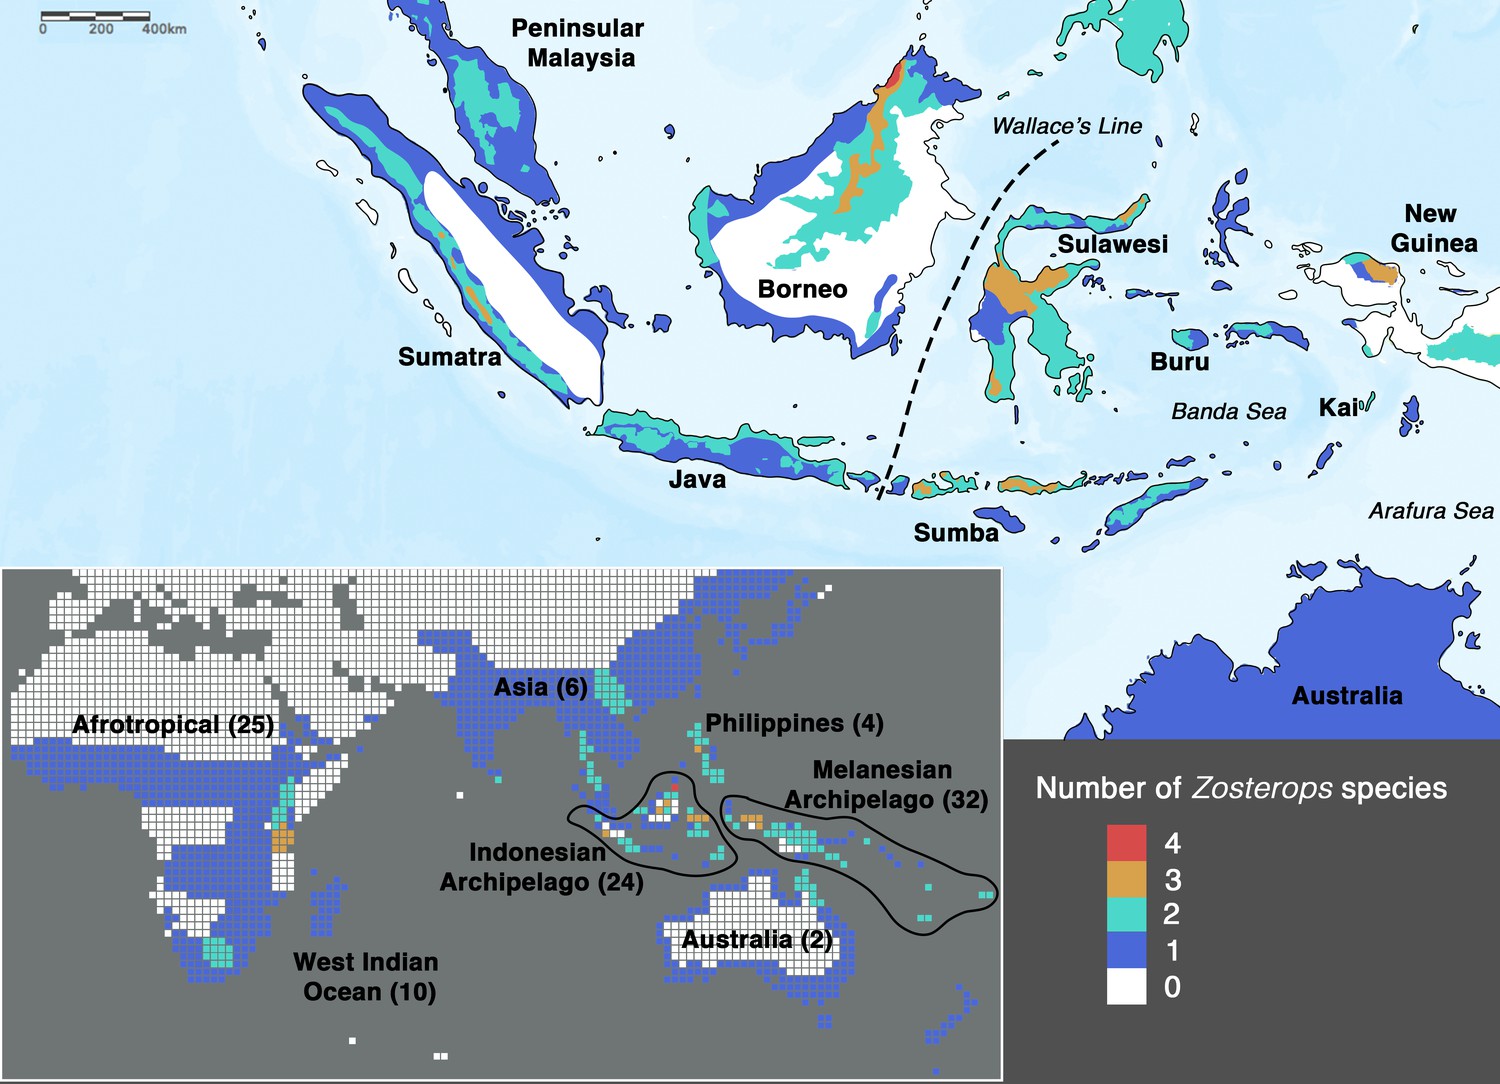 Maps showing the distribution of white-eyes, a type of bird, throughout the world and in the Indonesian region. The world map shows that the birds are distributed in parts of subsaharan Africa, Madagascar, South, Southeastern, and Eastern Asia, and Australia, New Zealand, and other islands. The detailed map of Indonesia shows the distribution of the birds in that region. Both maps are shaded to indicate species diversity, with gray being zero species, dark blue being one species, blue-green being two species, light brown being three species, and red being four species. In most of the region where white eyes are distributed, there is only one species. The most diverse area is on the northern tip of Borneo, where four species exist. Species total by region include: Afrotropical, 25 species; West Indian Ocean, 10 species; Asia, 6 species; Indonesian Archipelago, 24 species; the Philippines, 4 species; the Melanesian Archipelago, 32 species; and Australia, 2 species.